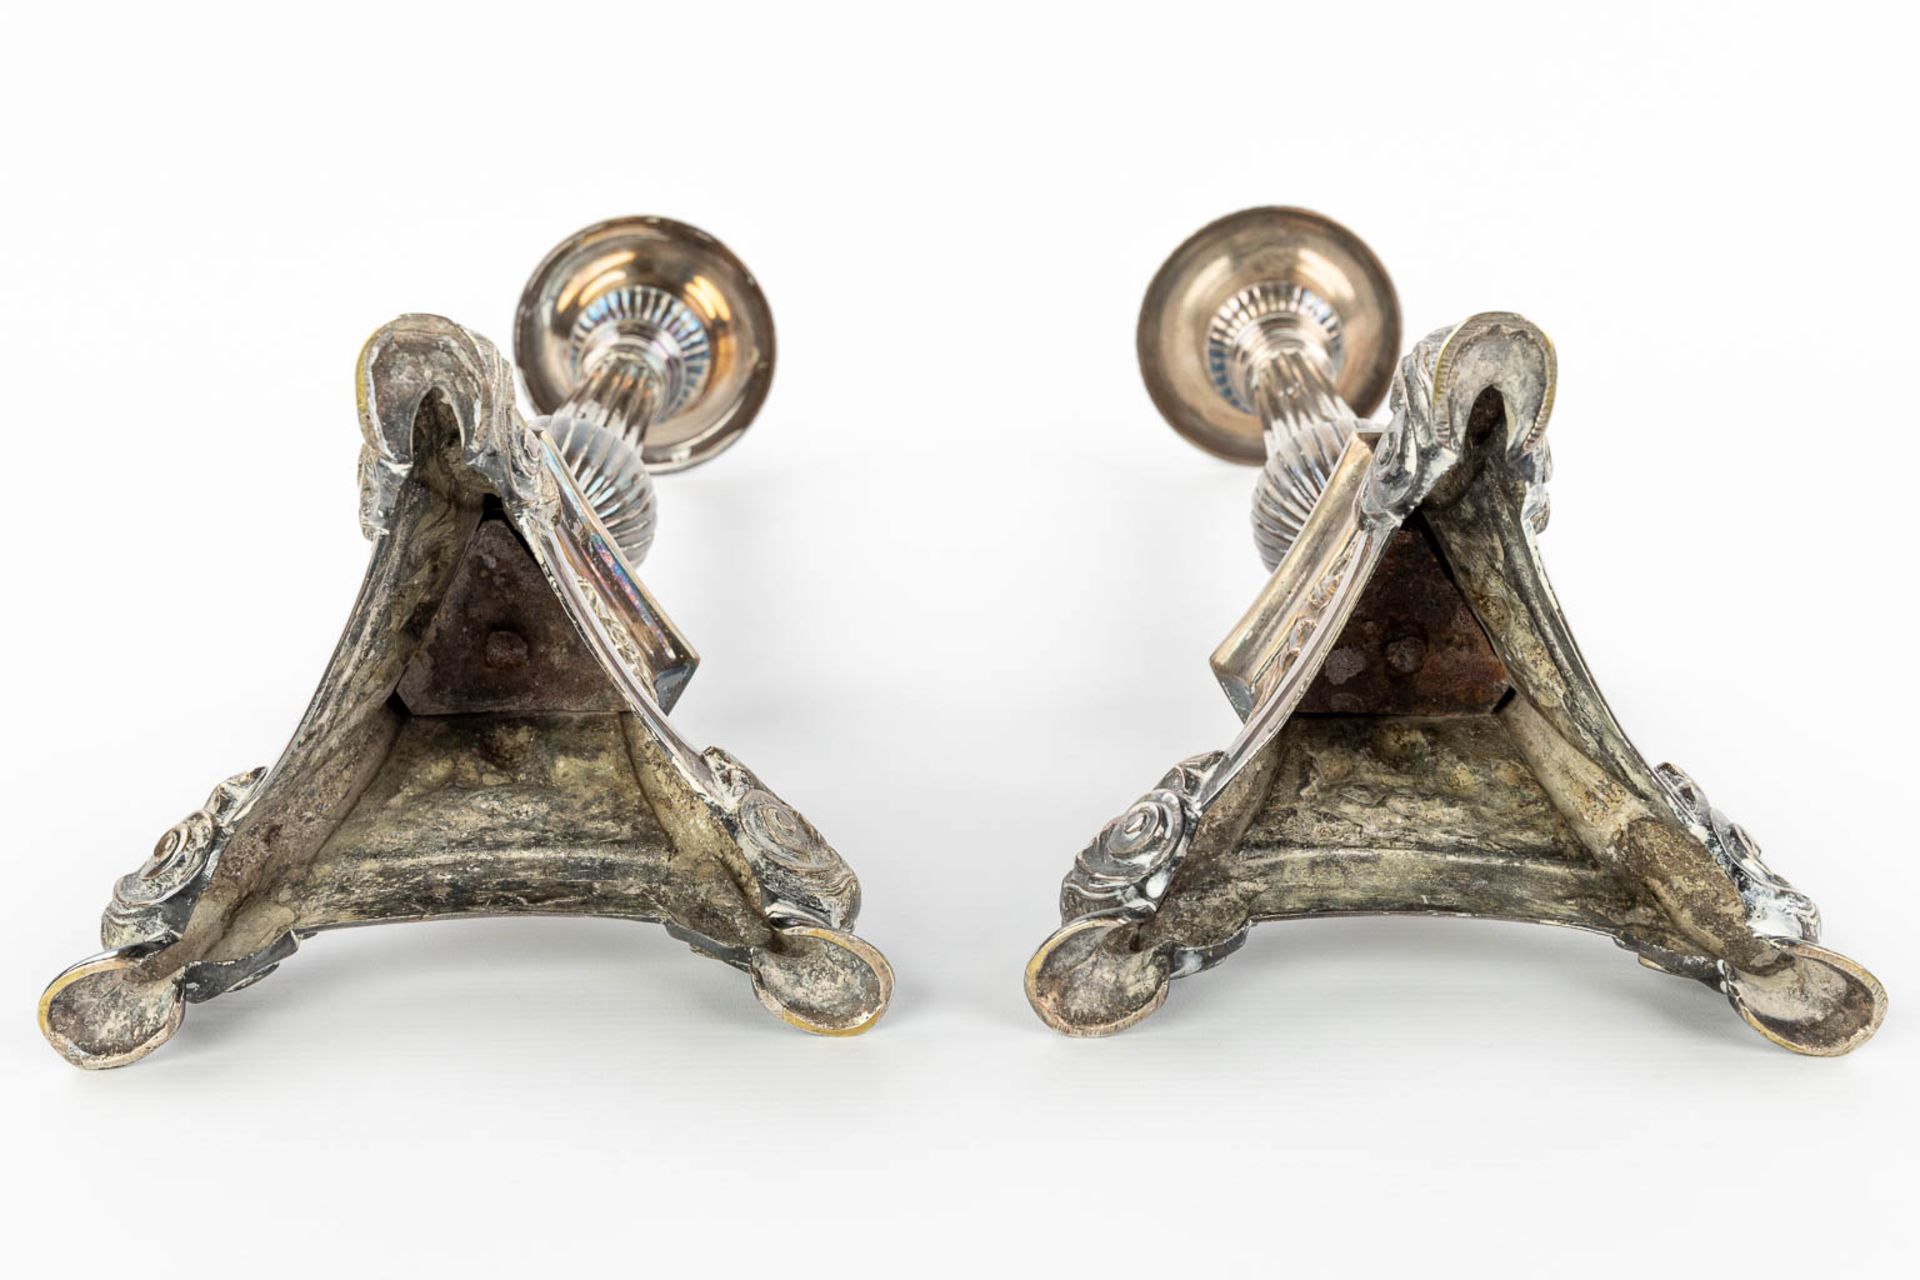 A pair of silver-plated candlesticks decorated with images of holy figurines. (H:59cm) - Image 4 of 11